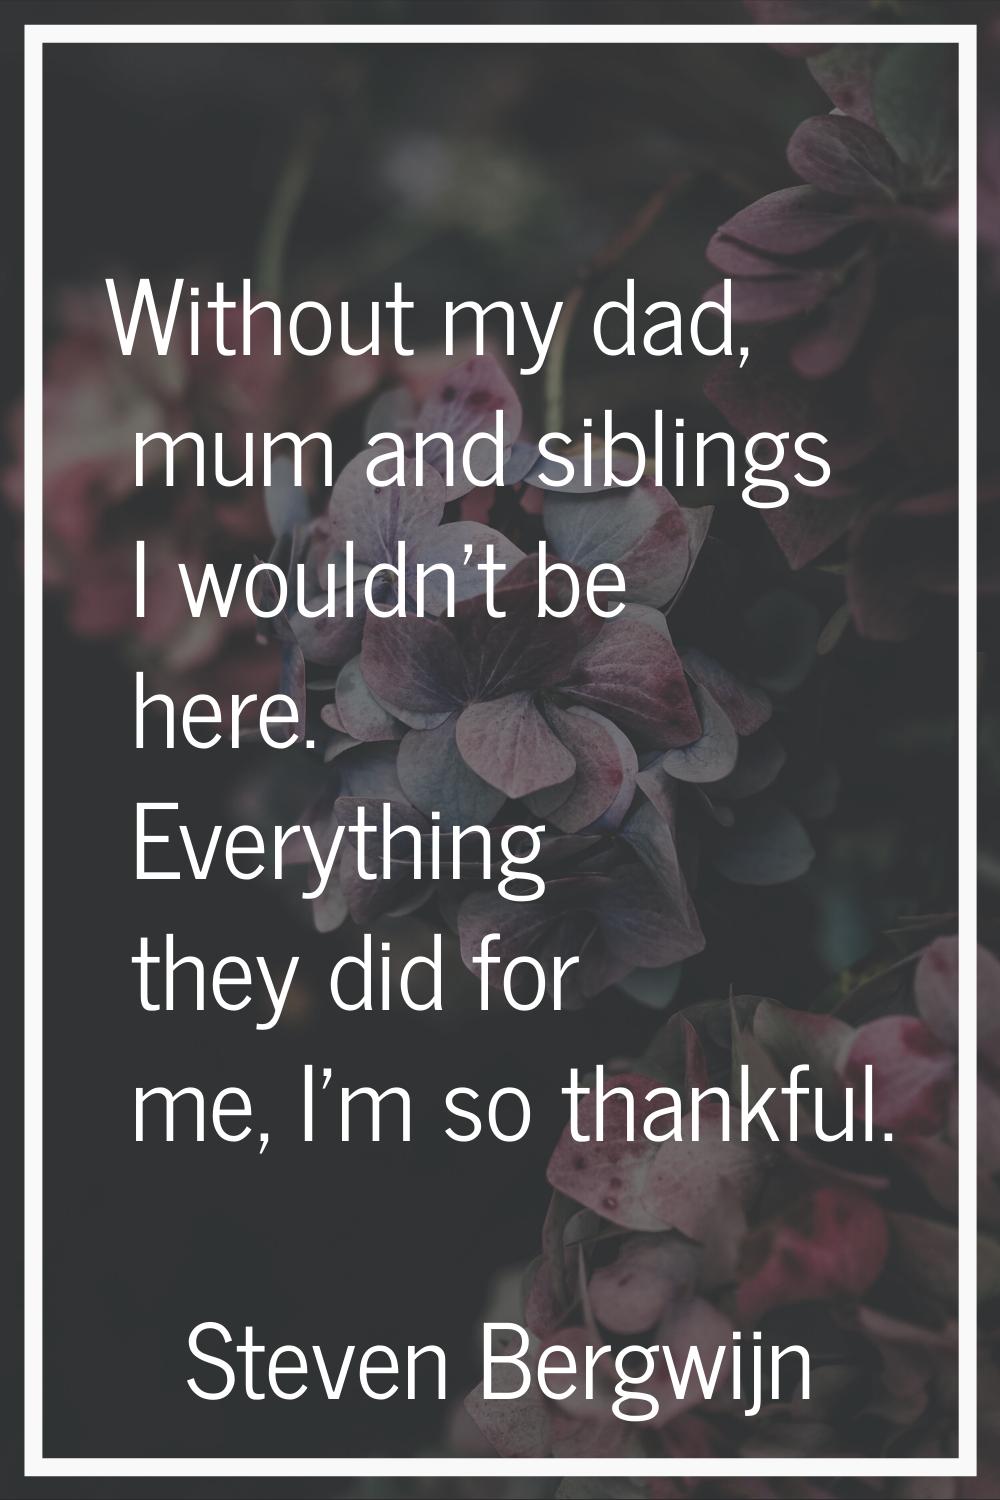 Without my dad, mum and siblings I wouldn't be here. Everything they did for me, I'm so thankful.